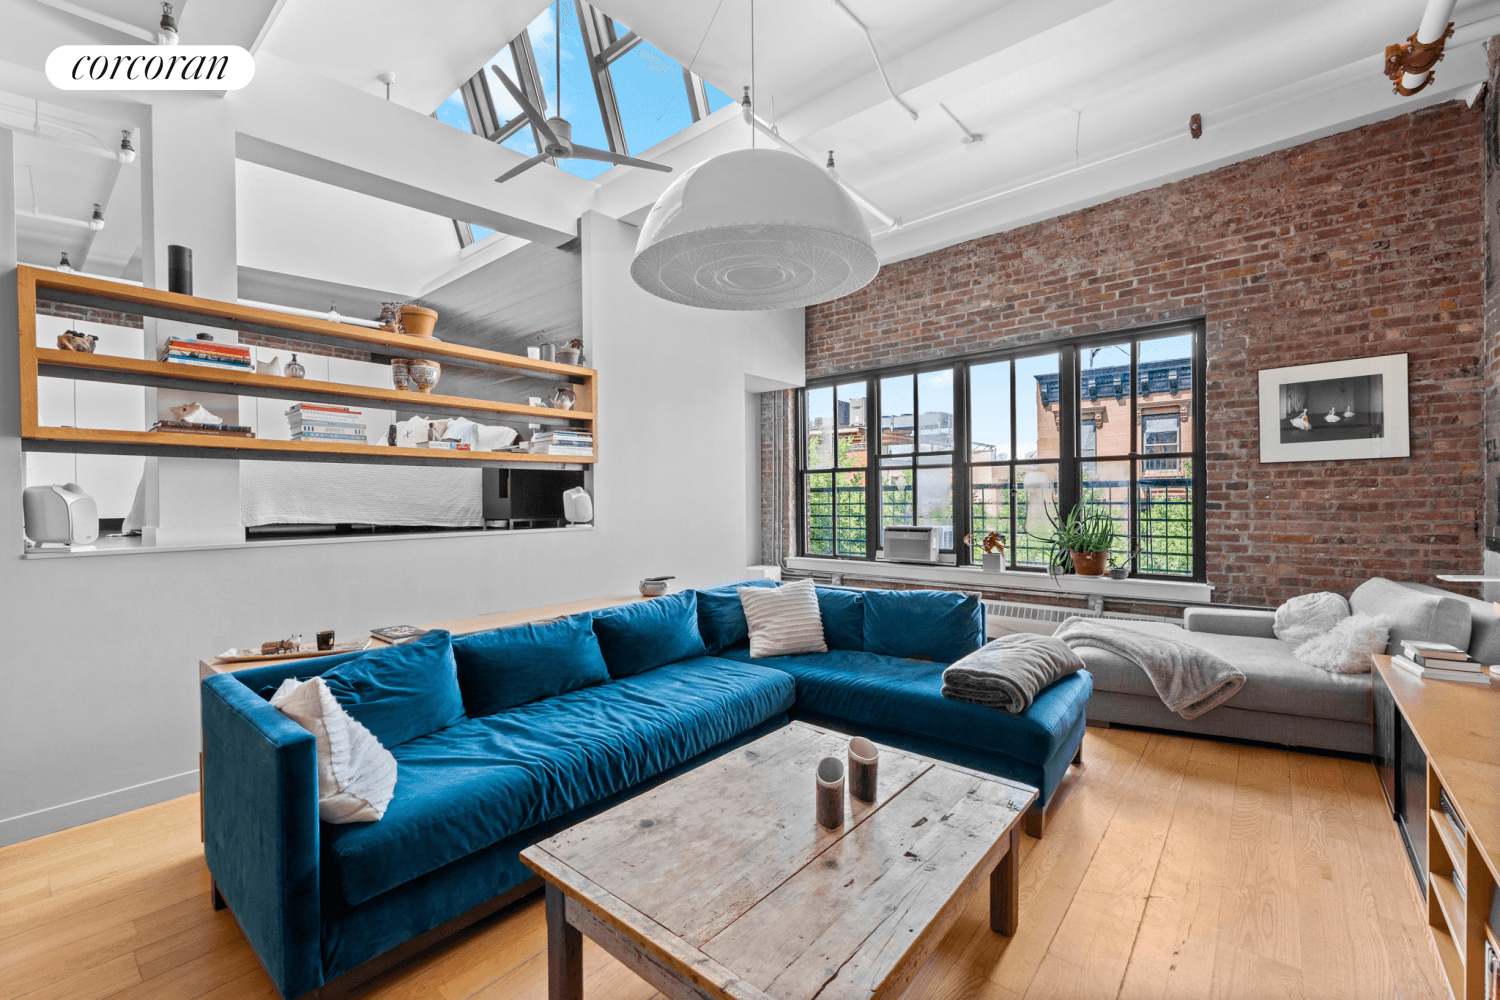 Once a factory, now a stunning two bedroom loft.